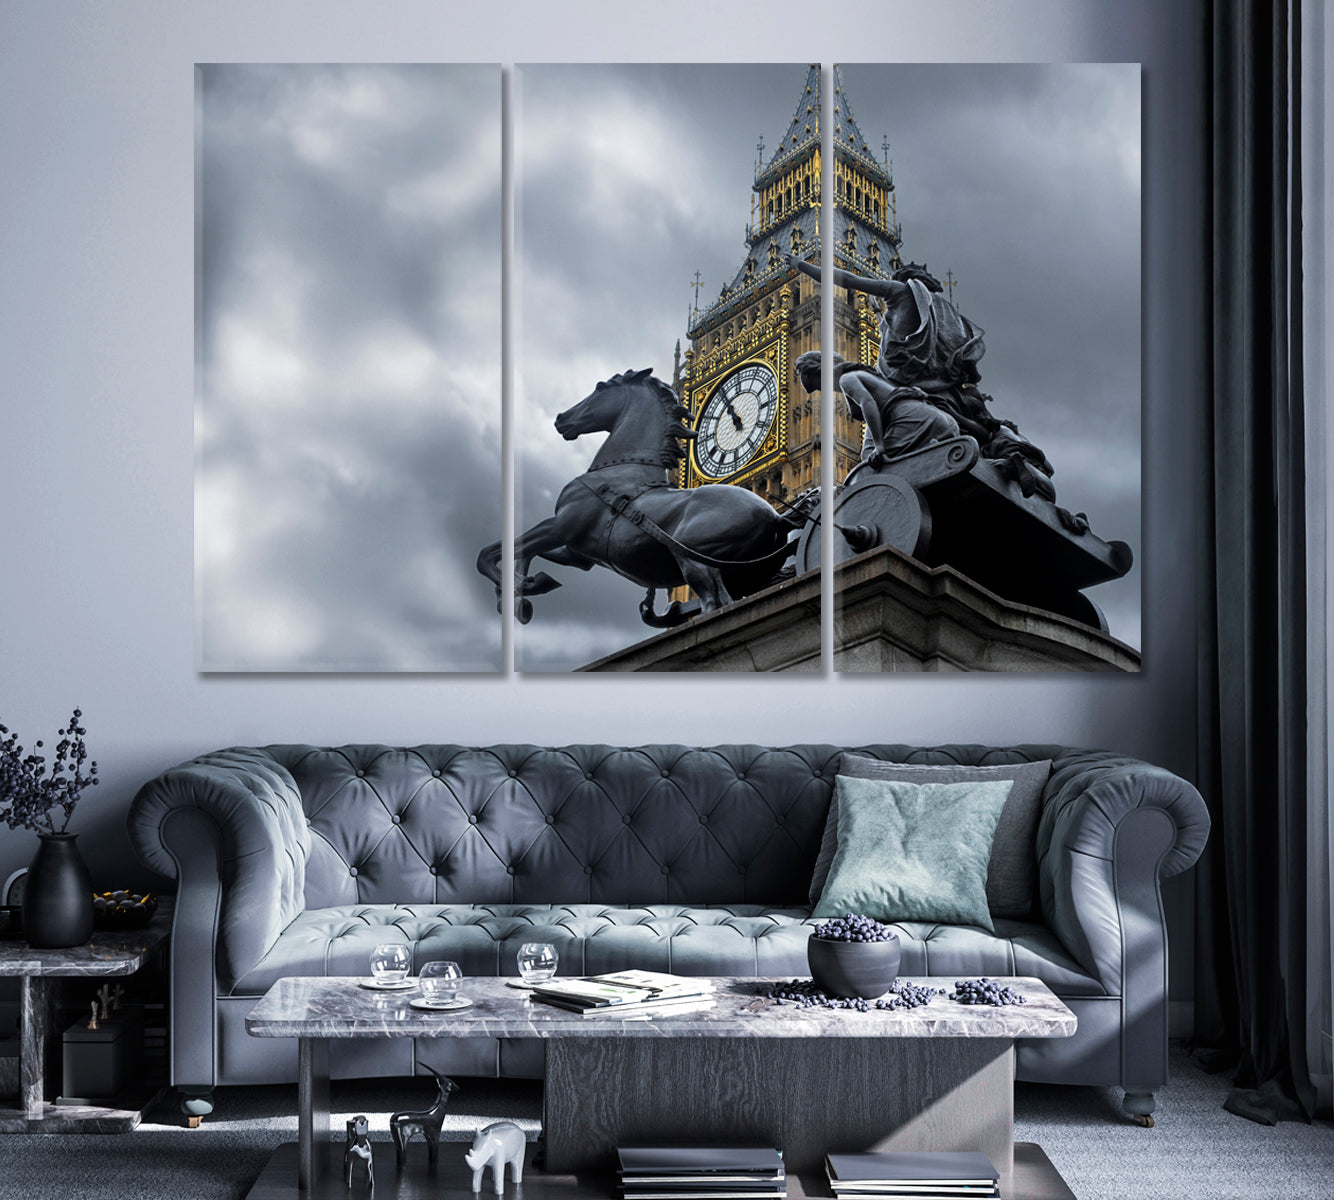 Big Ben and Boadicea Statue Canvas Print ArtLexy 3 Panels 36"x24" inches 